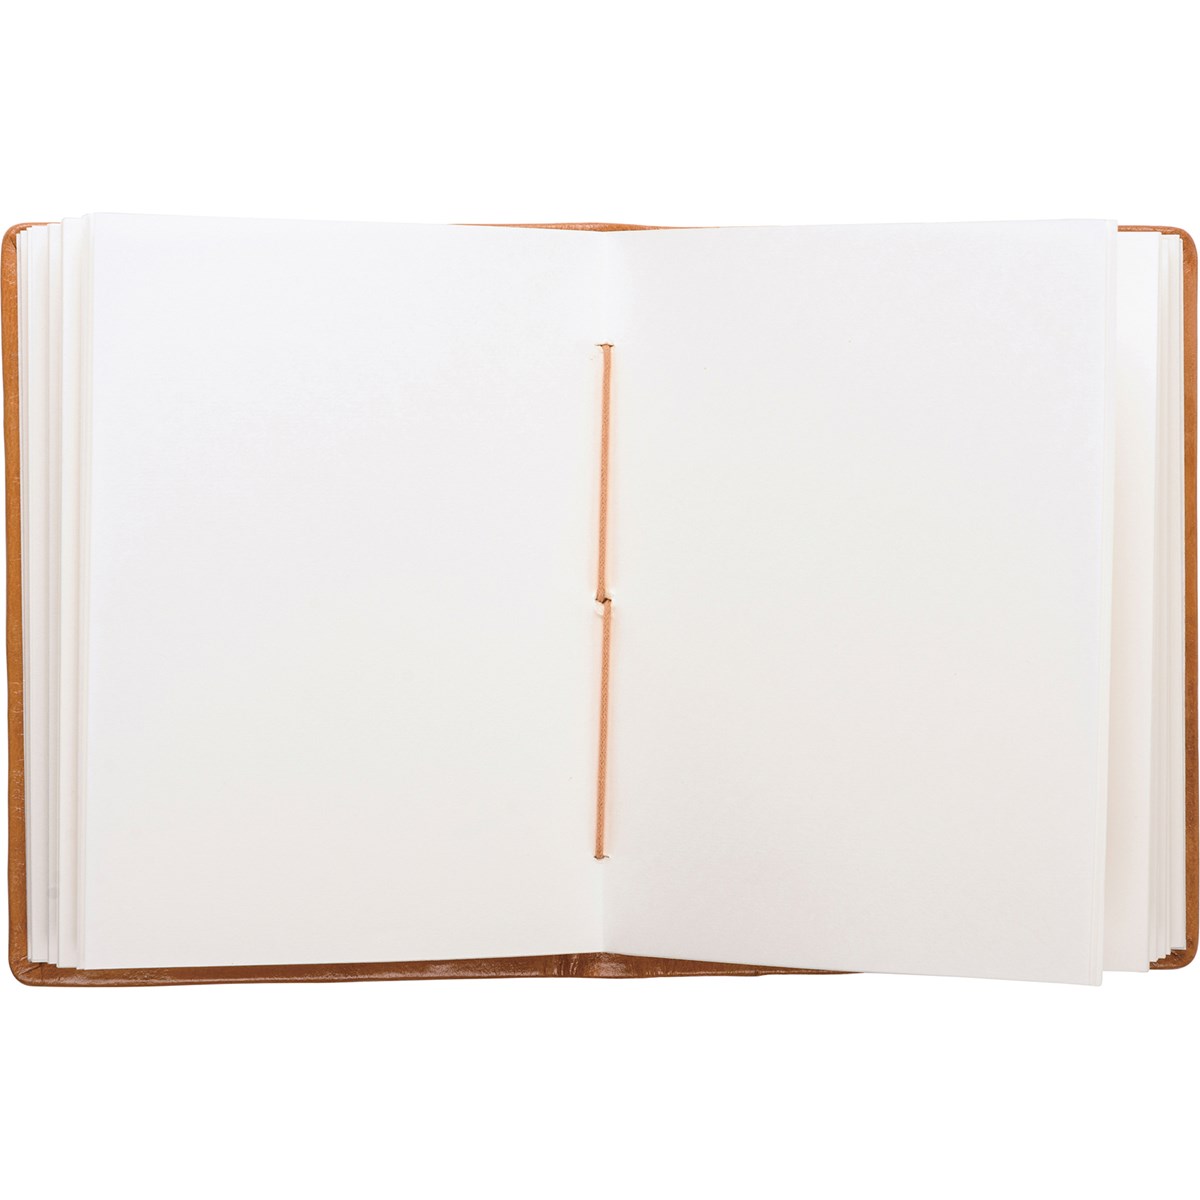 See The Good Be The Light Journal - Leather, Paper